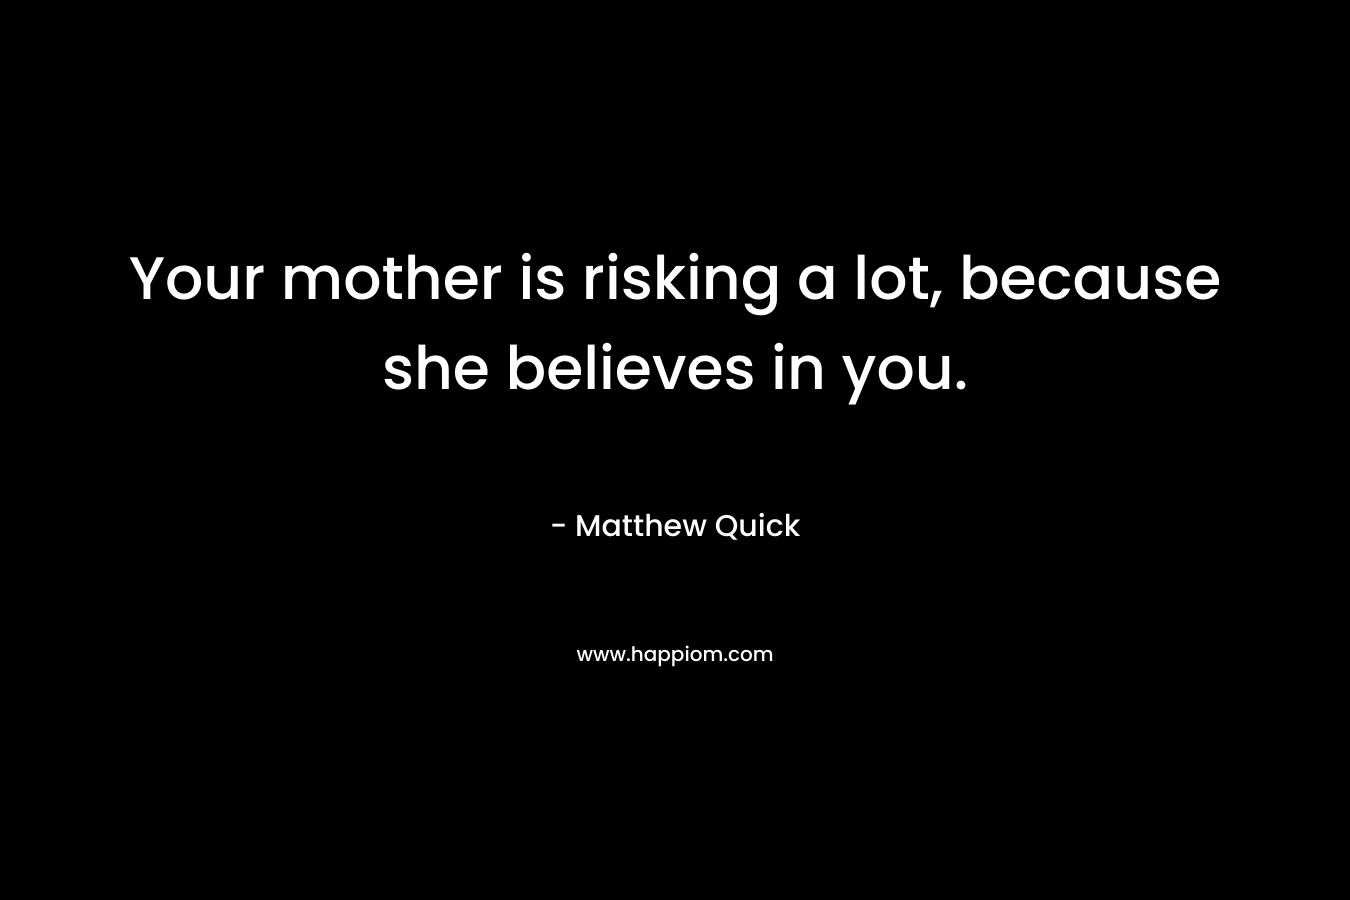 Your mother is risking a lot, because she believes in you. – Matthew Quick